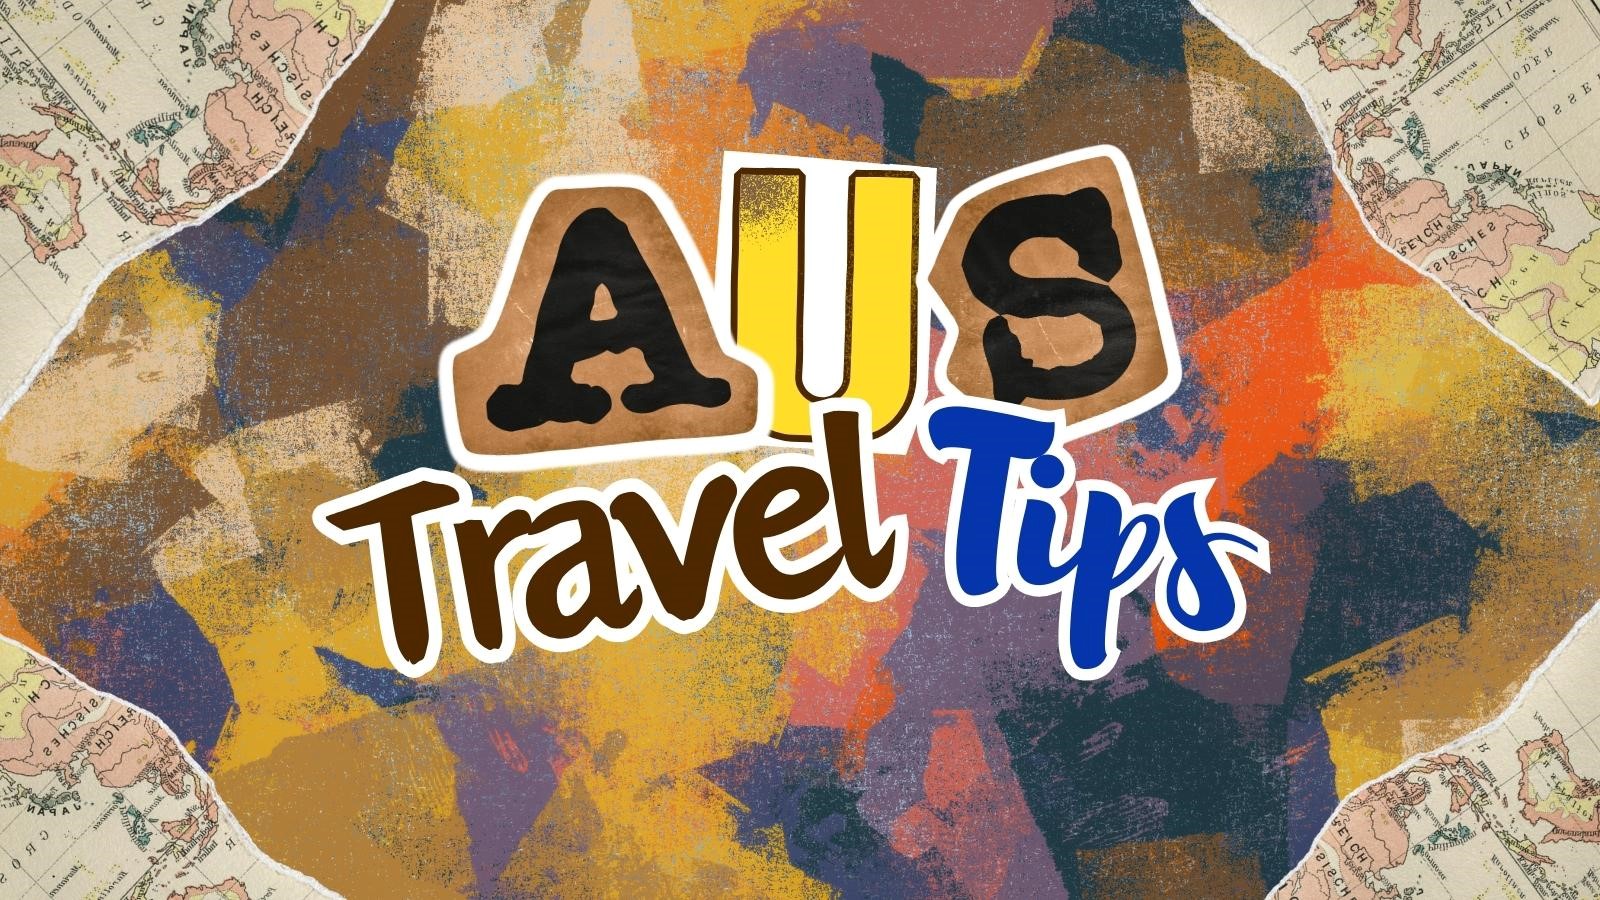 AUS Travel Tips, map on in the background with colorful watermarkings.